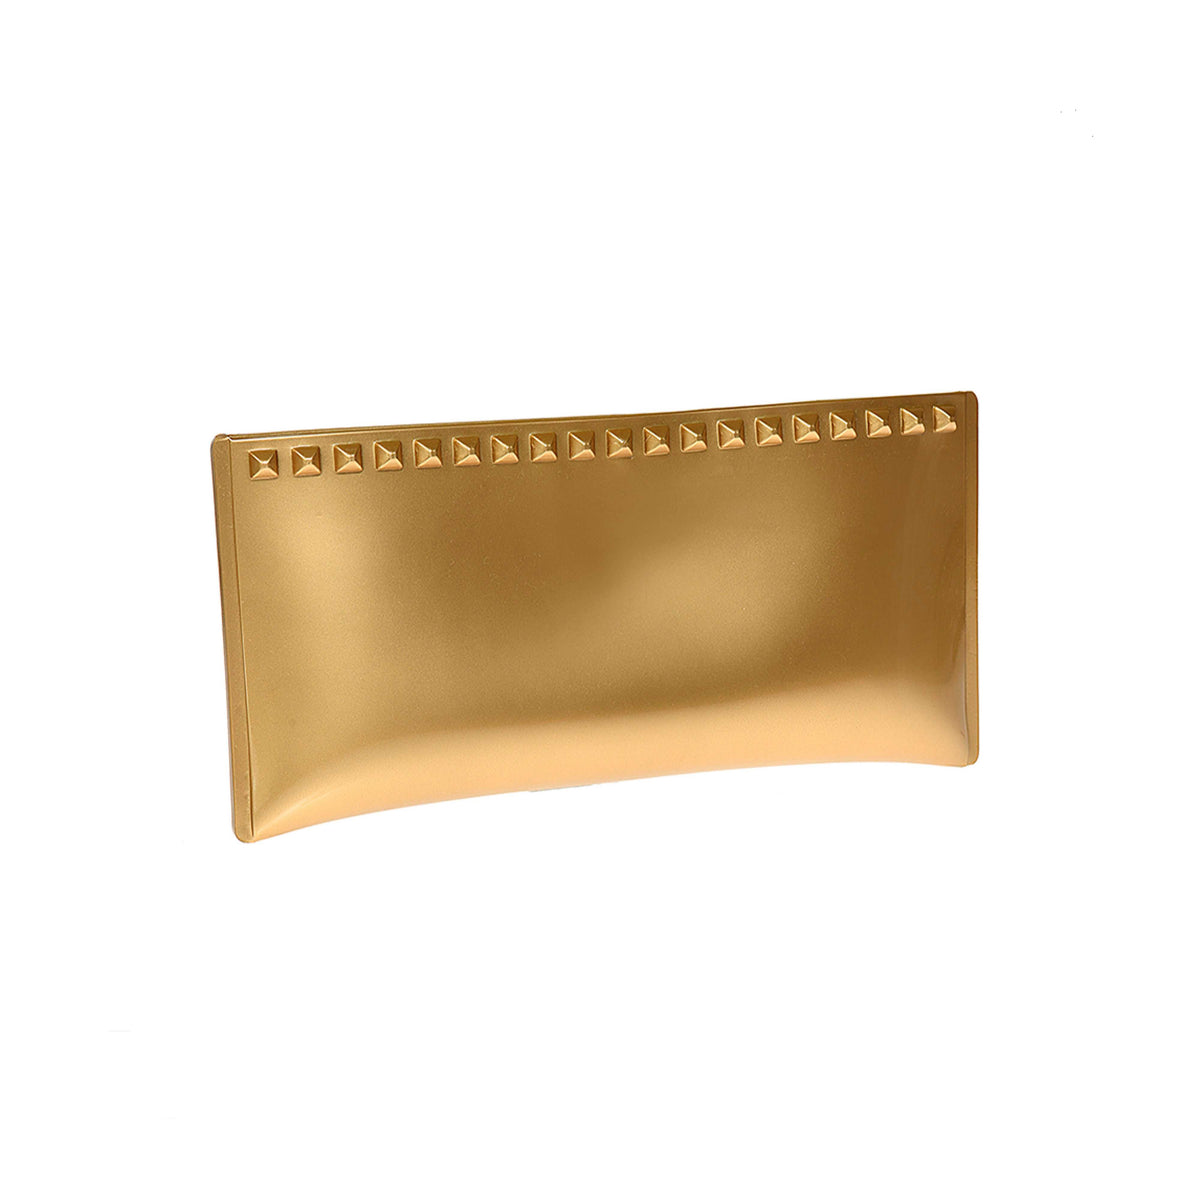 Gold Julian studded purse which are sleek and sustainable